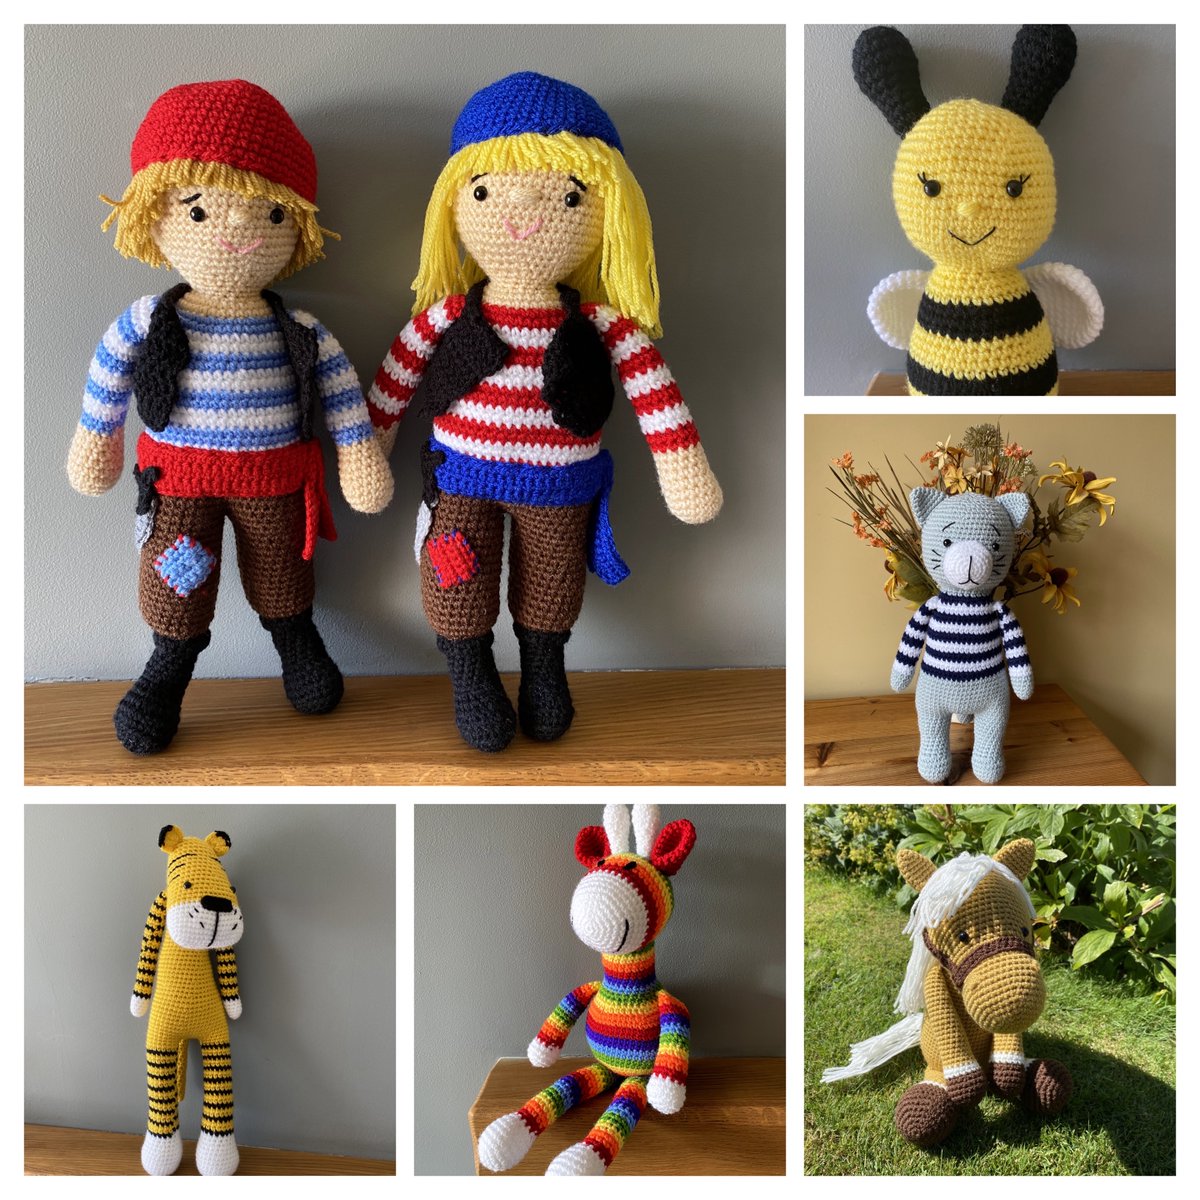 Cheer up every day with handmade gift ideas for babies and kids of all ages from Bitzas 😀 #etsy #giftideas #etsyshop #firsttmaster #MHHSBD bitzas.etsy.com